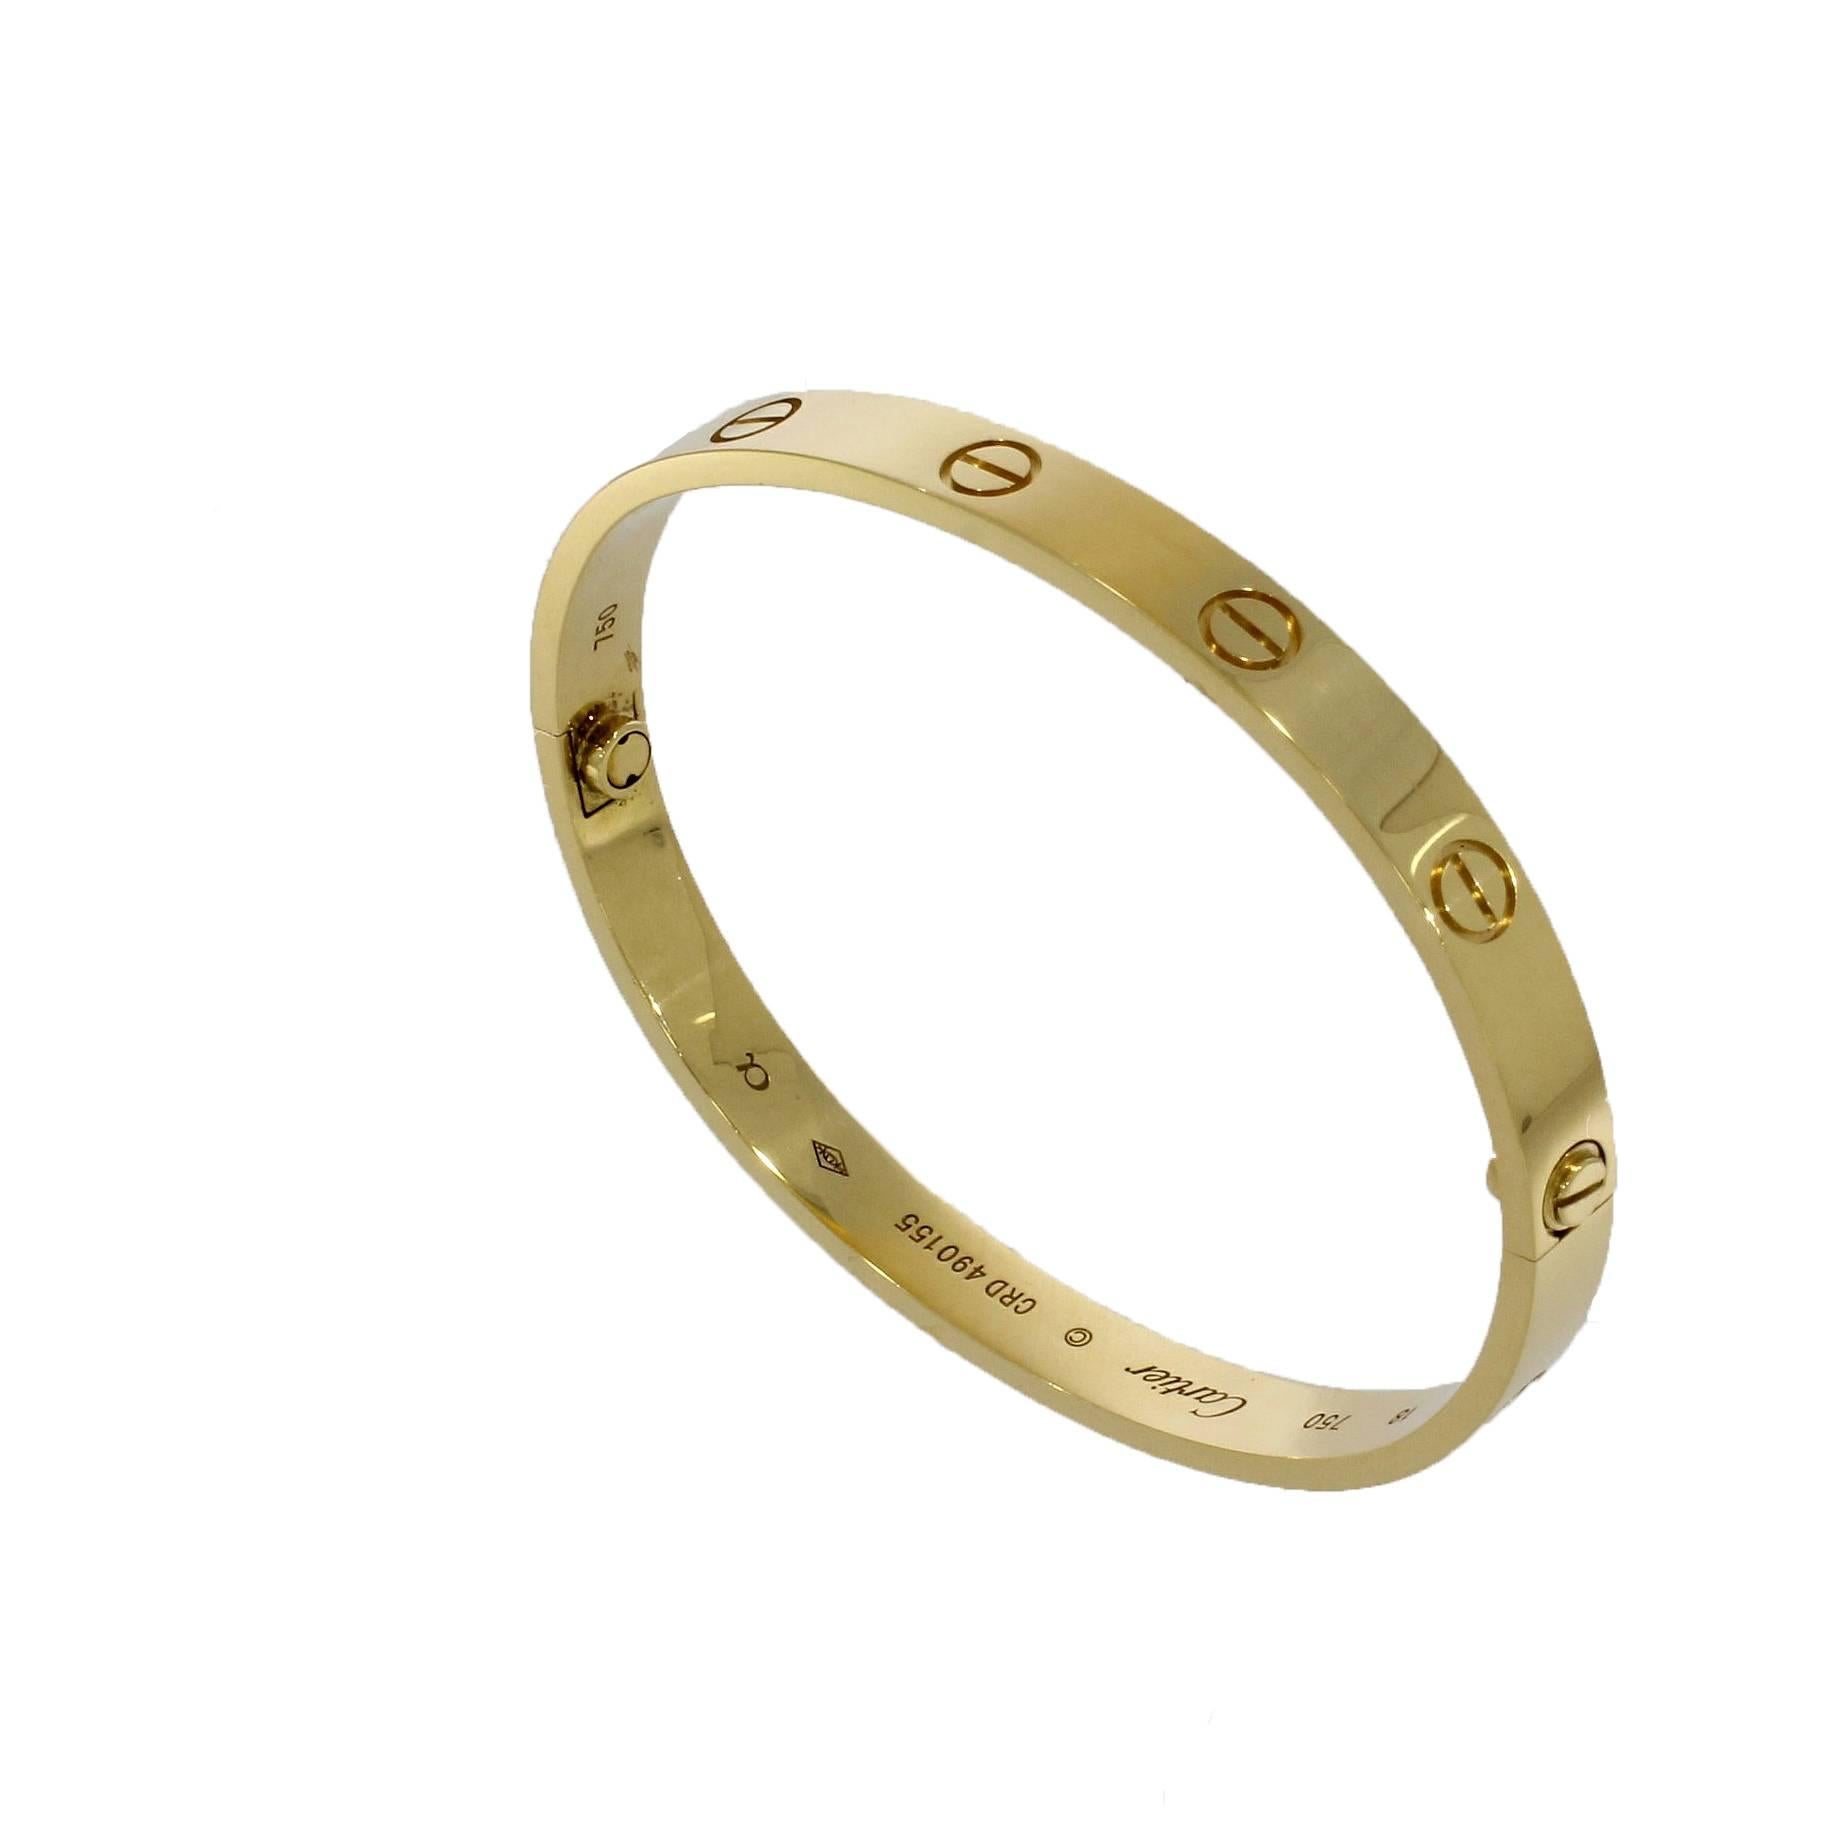 Cartier Yellow Gold Love Bangle Bracelet No Screwdriver In Excellent Condition For Sale In Epsom, Surrey